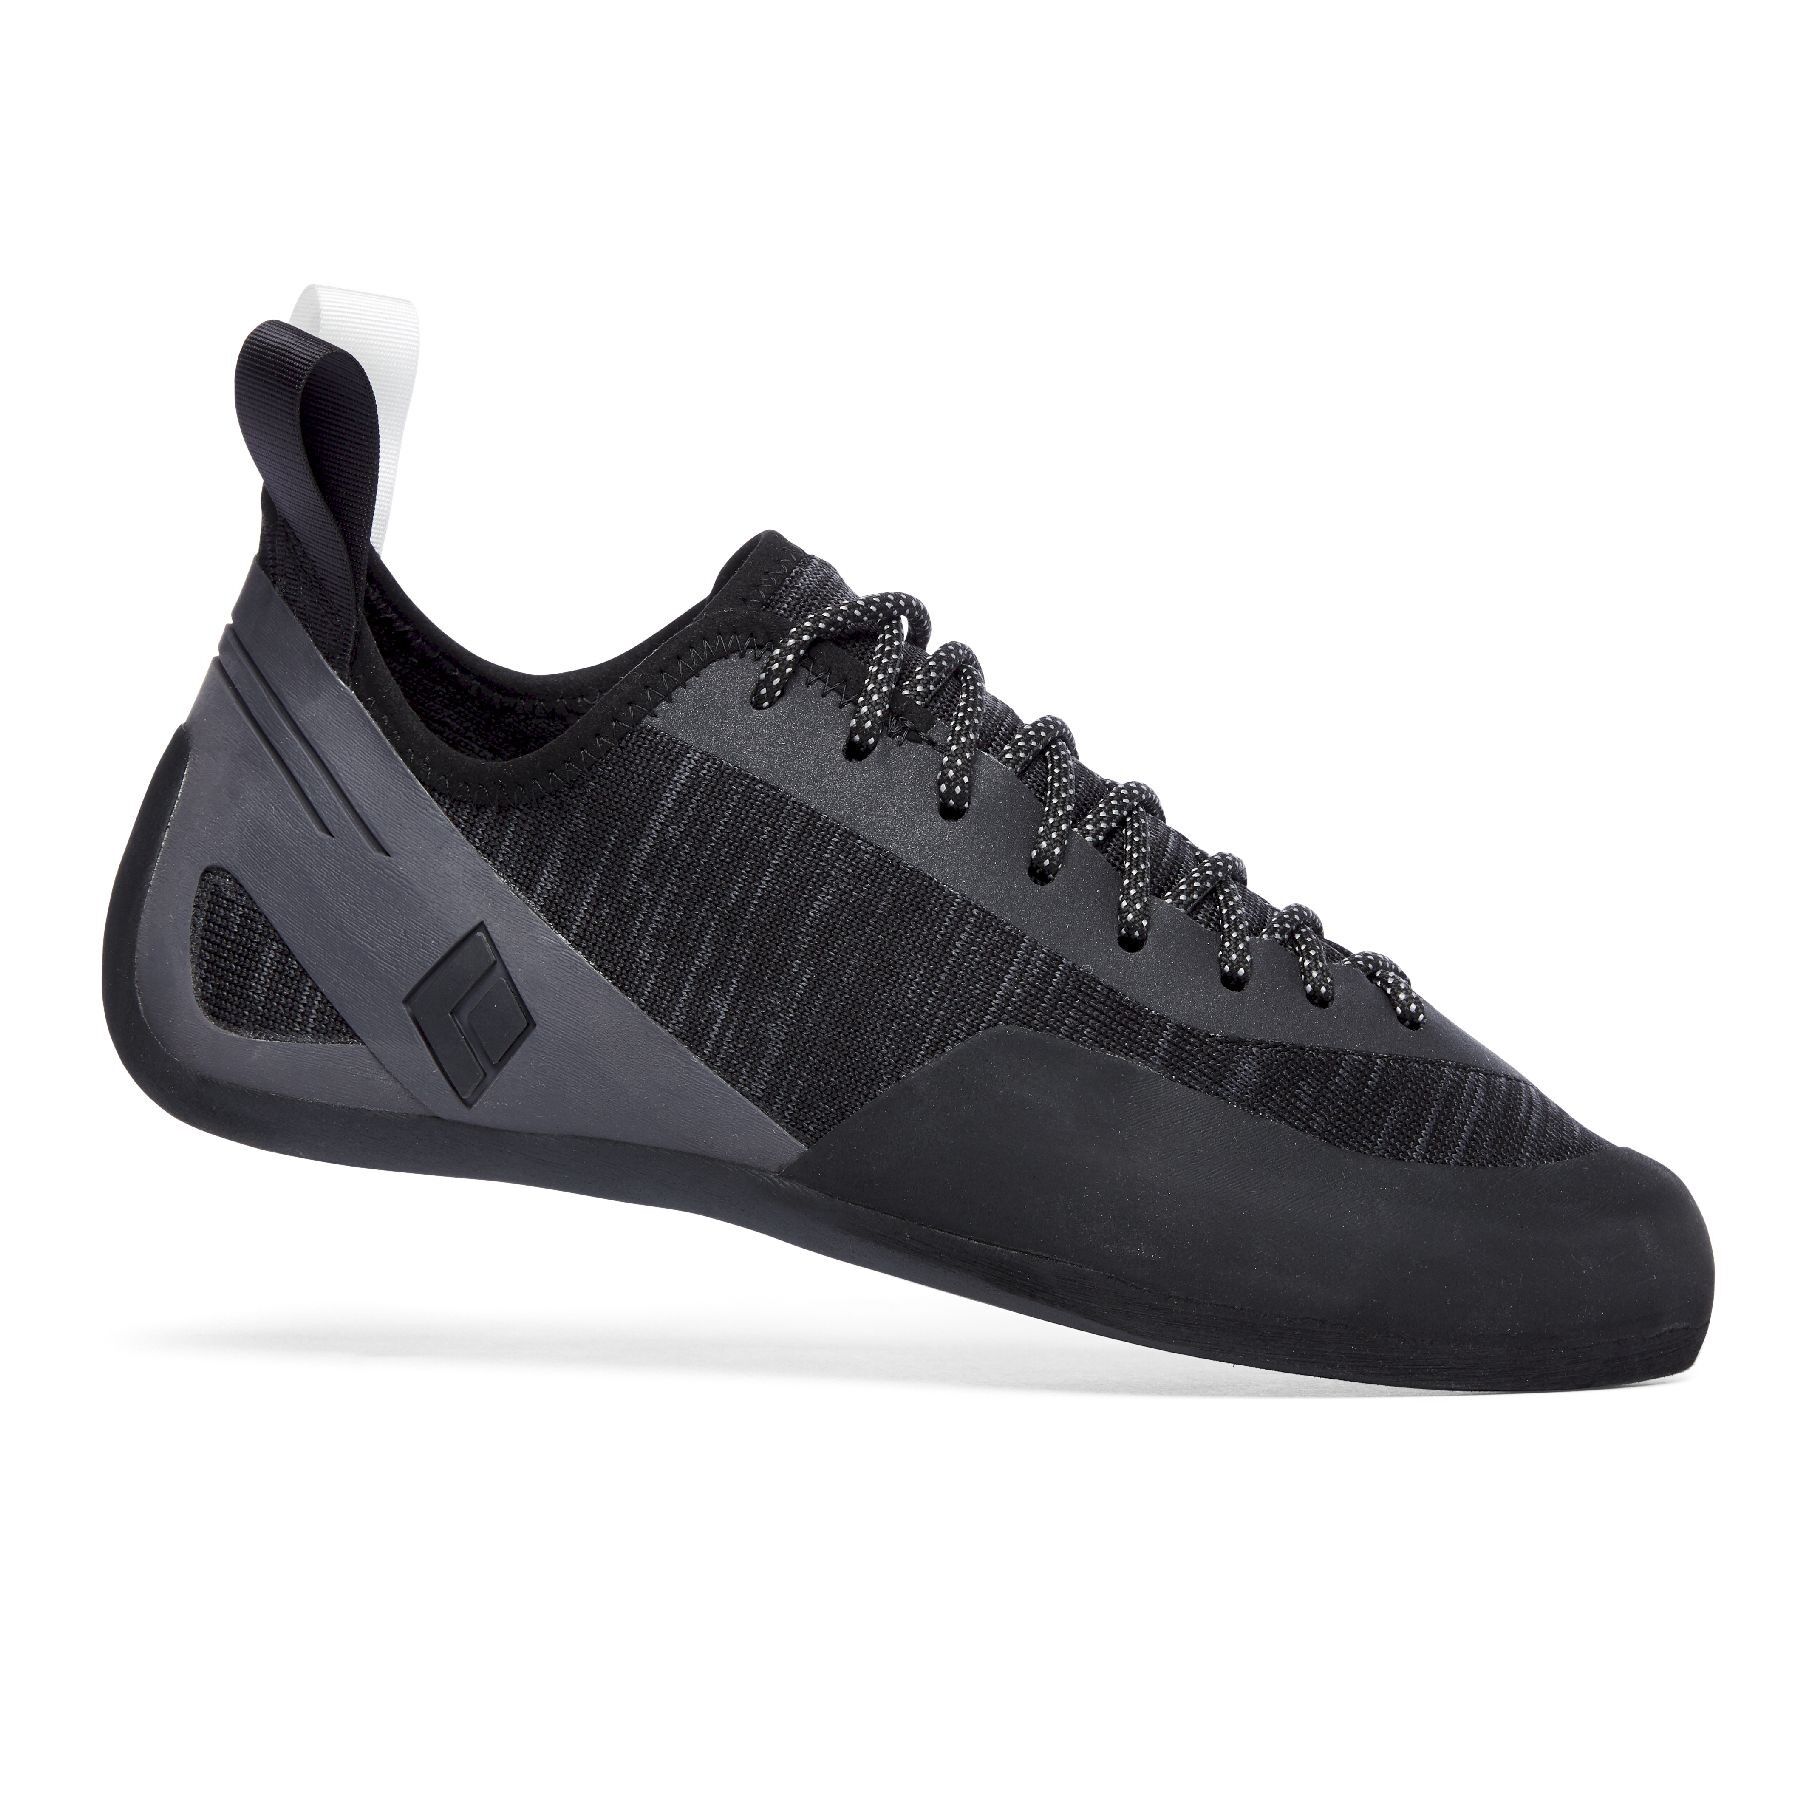 Black Diamond Momentum Lace Climb Shoes - Chaussons escalade homme | Hardloop